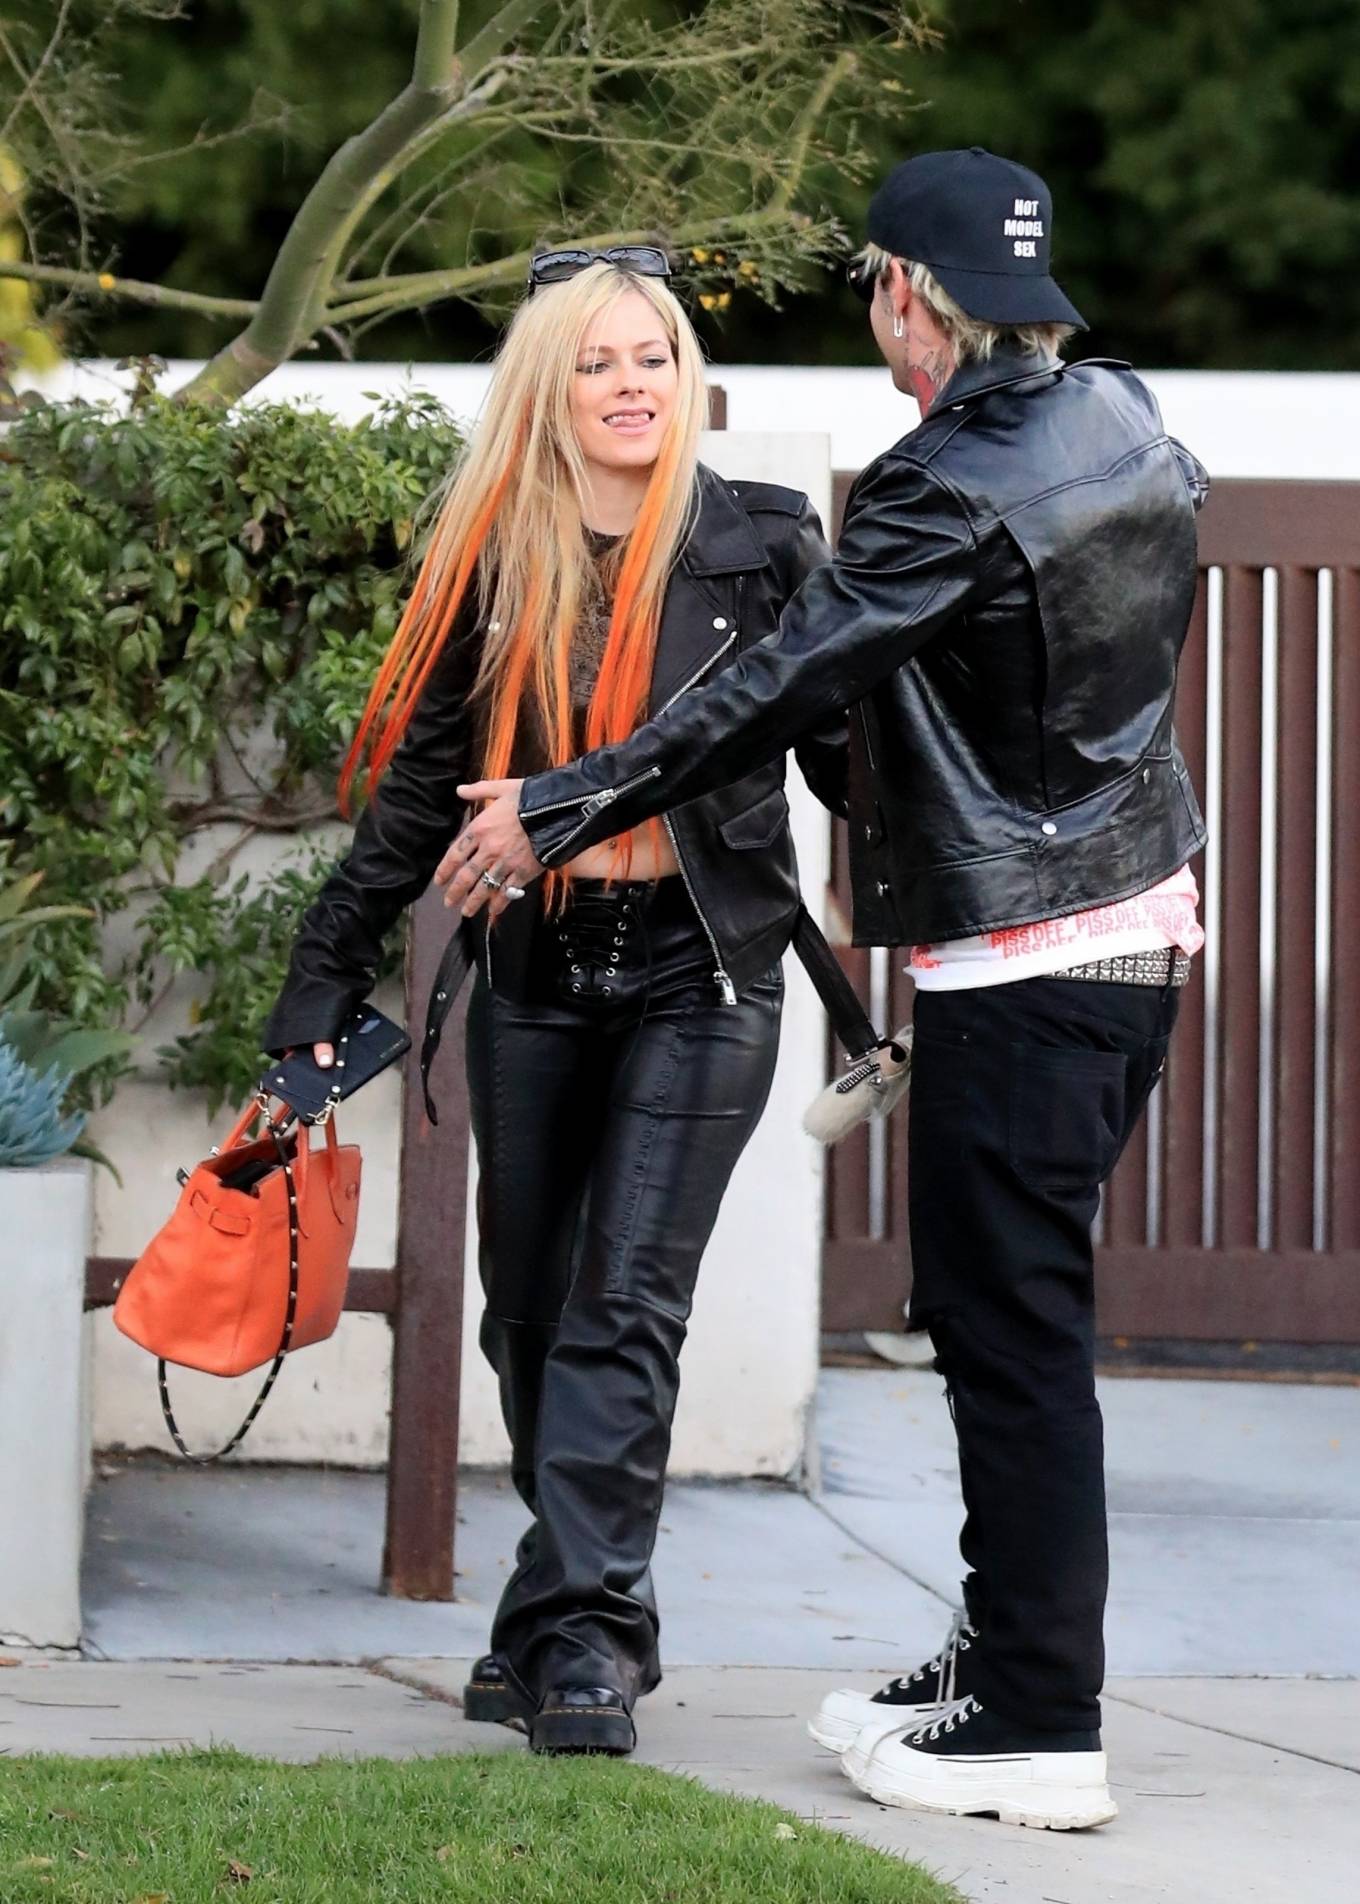 Avril Lavigne - With Mod Sun in West Hollywood wearing matching black leather outfits